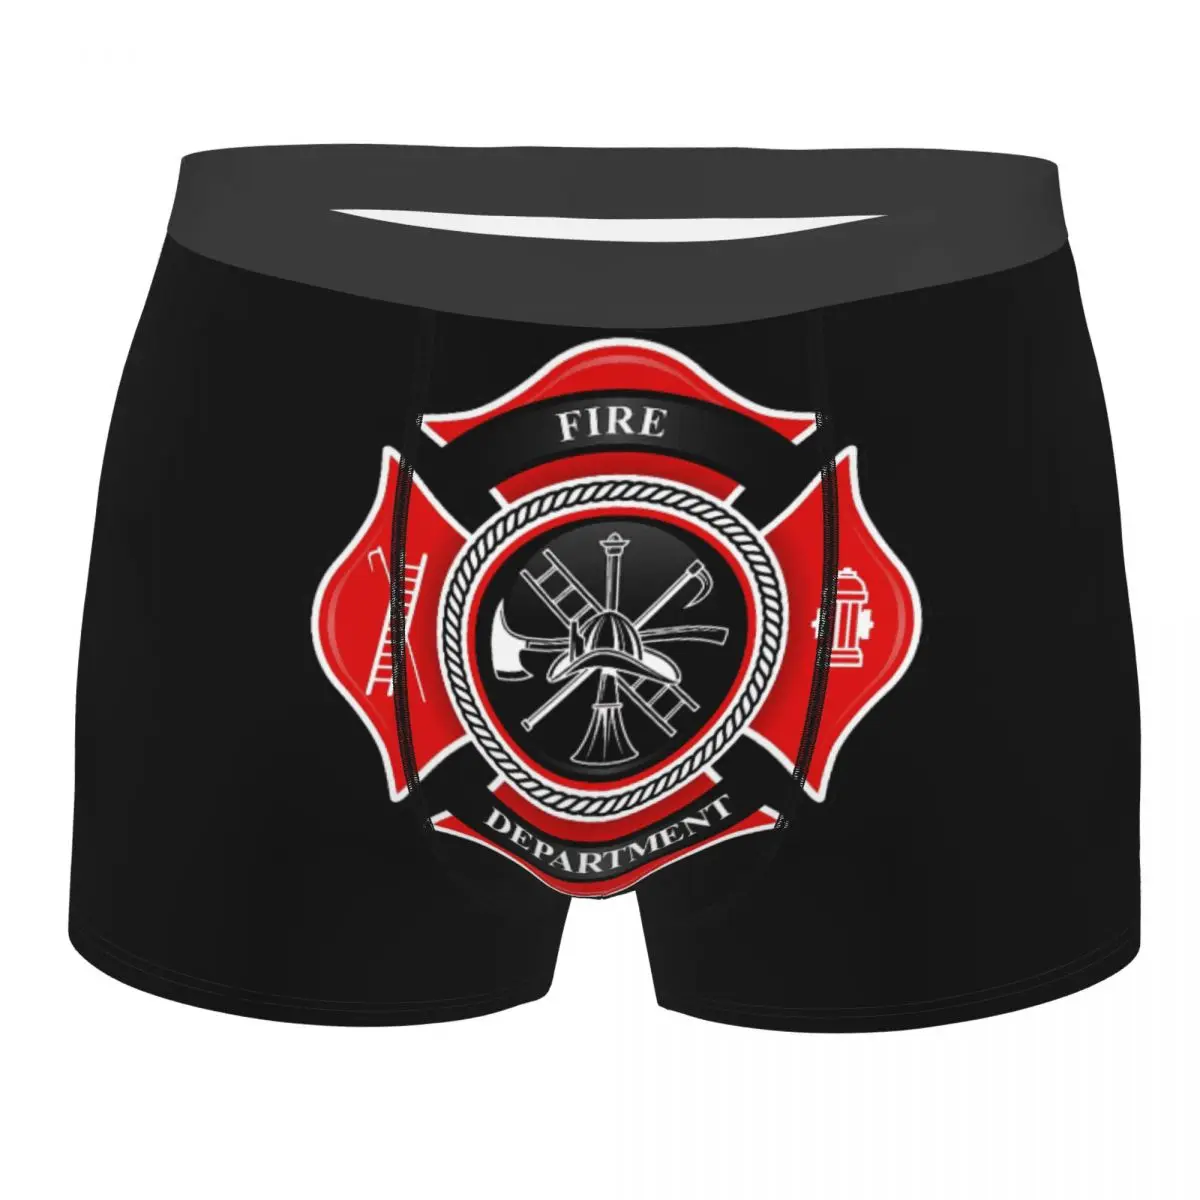 Fire Department Badge firefighter Men's Boxer Briefs special Highly Breathable Underpants High Quality 3D Print Shorts red fire department badge fireman men women socks windproof applicable throughout the year dressing gifts